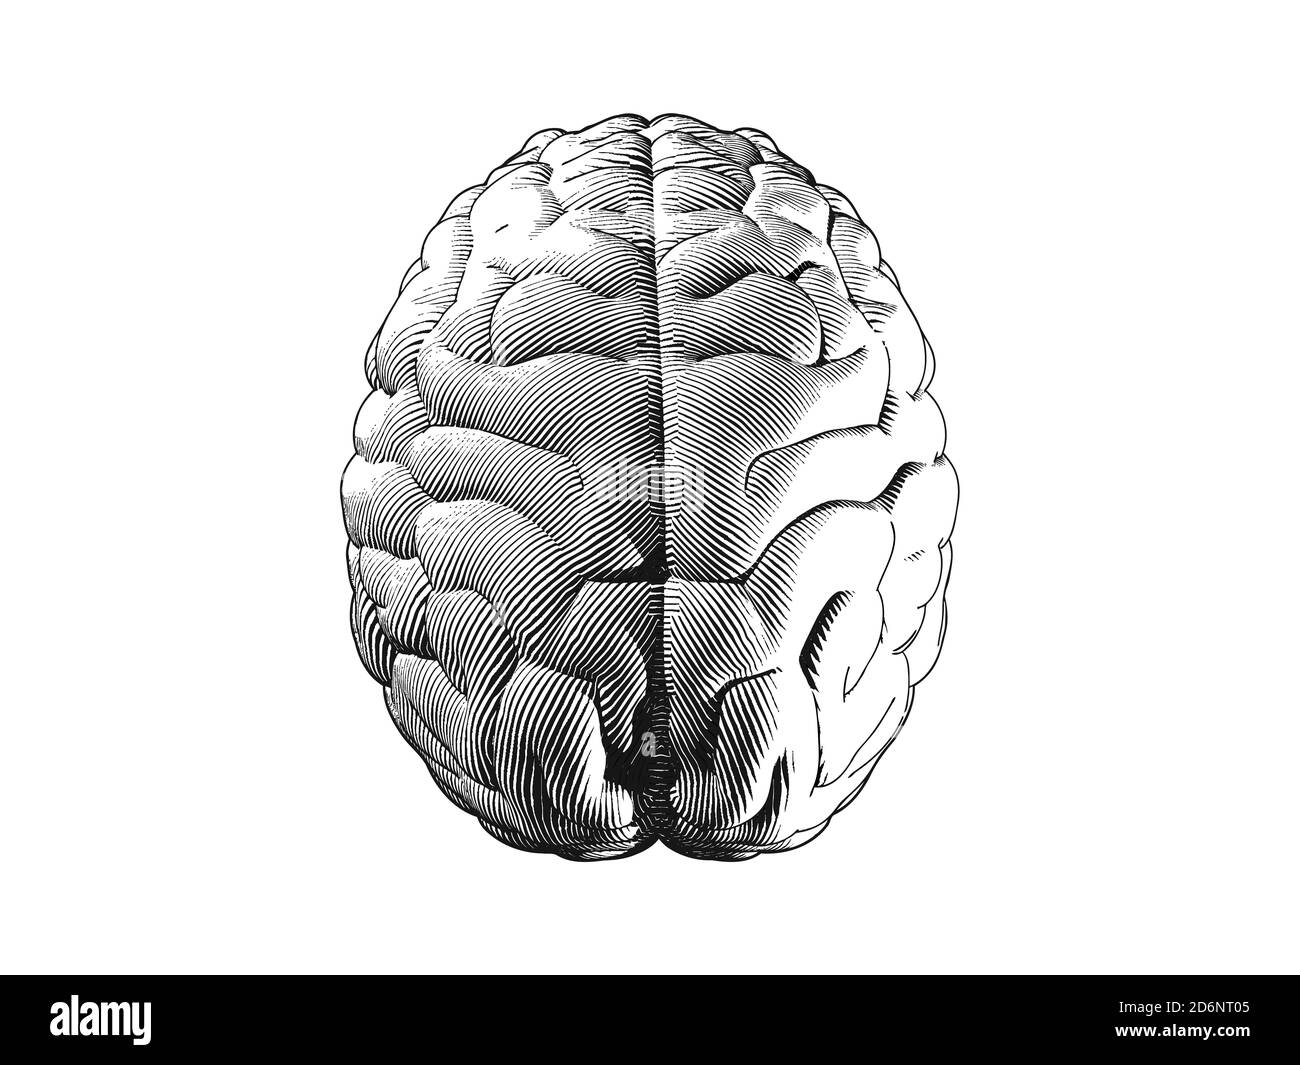 Monochrome human brain top view engraving illutration isolated on white background Stock Photo